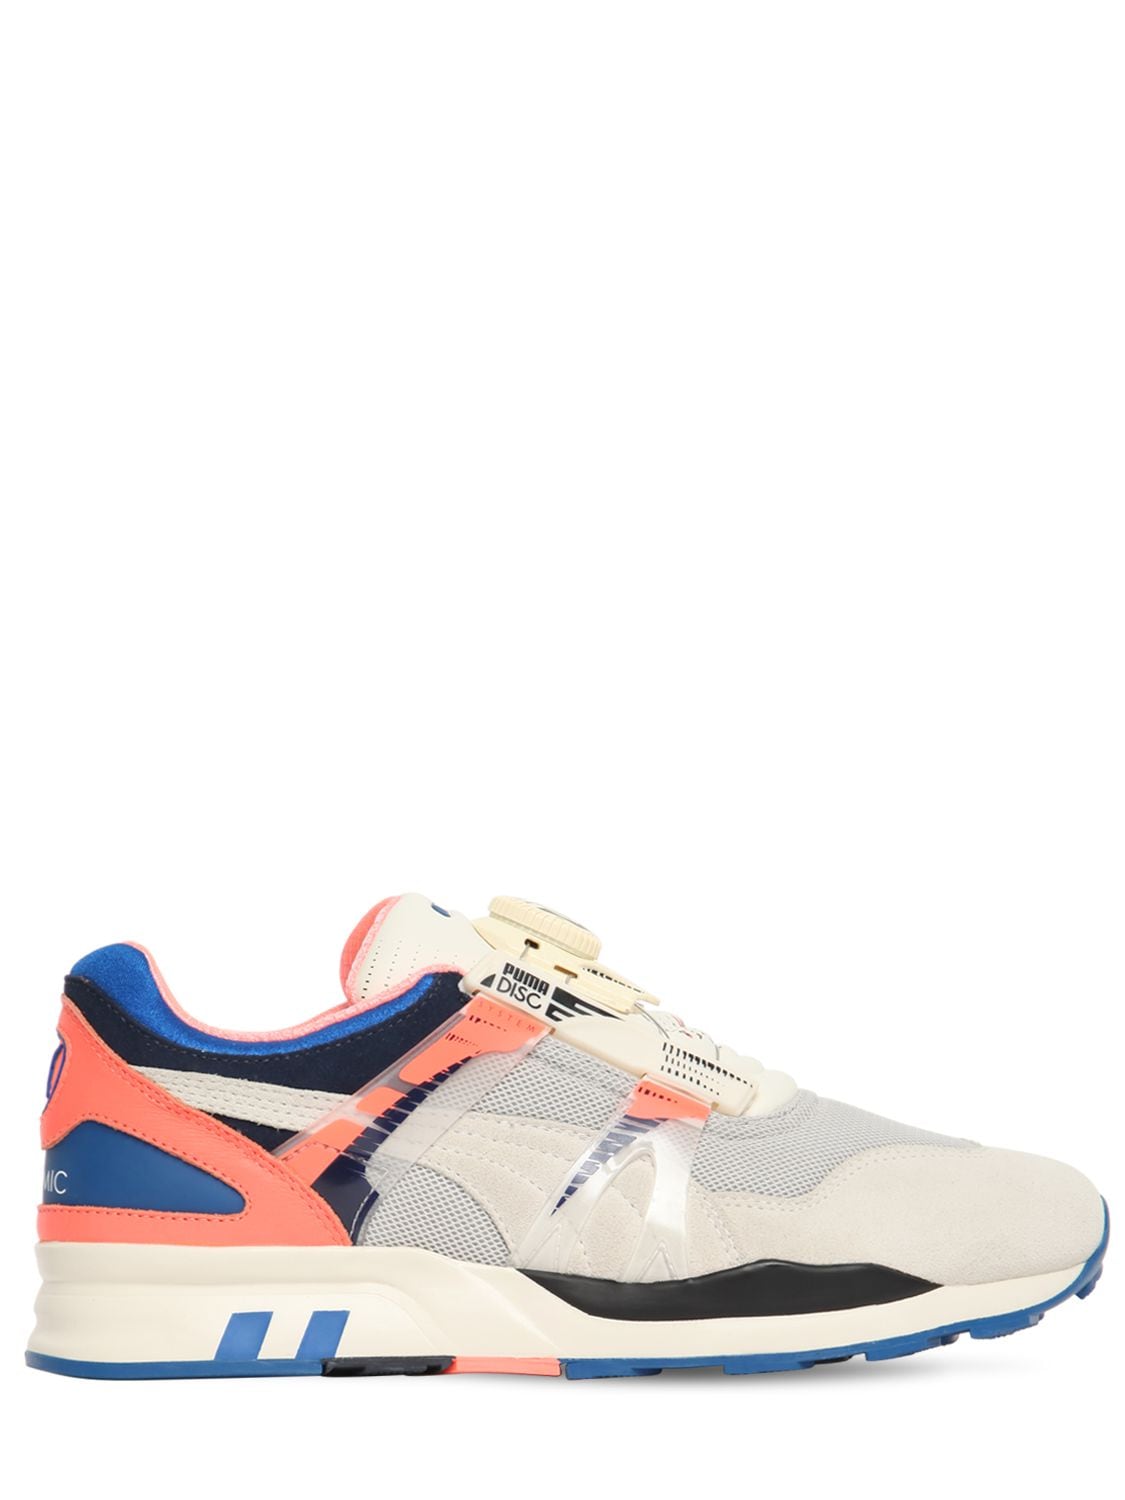 Puma Xs 7000 Disc Story Sneakers In Gray,peach